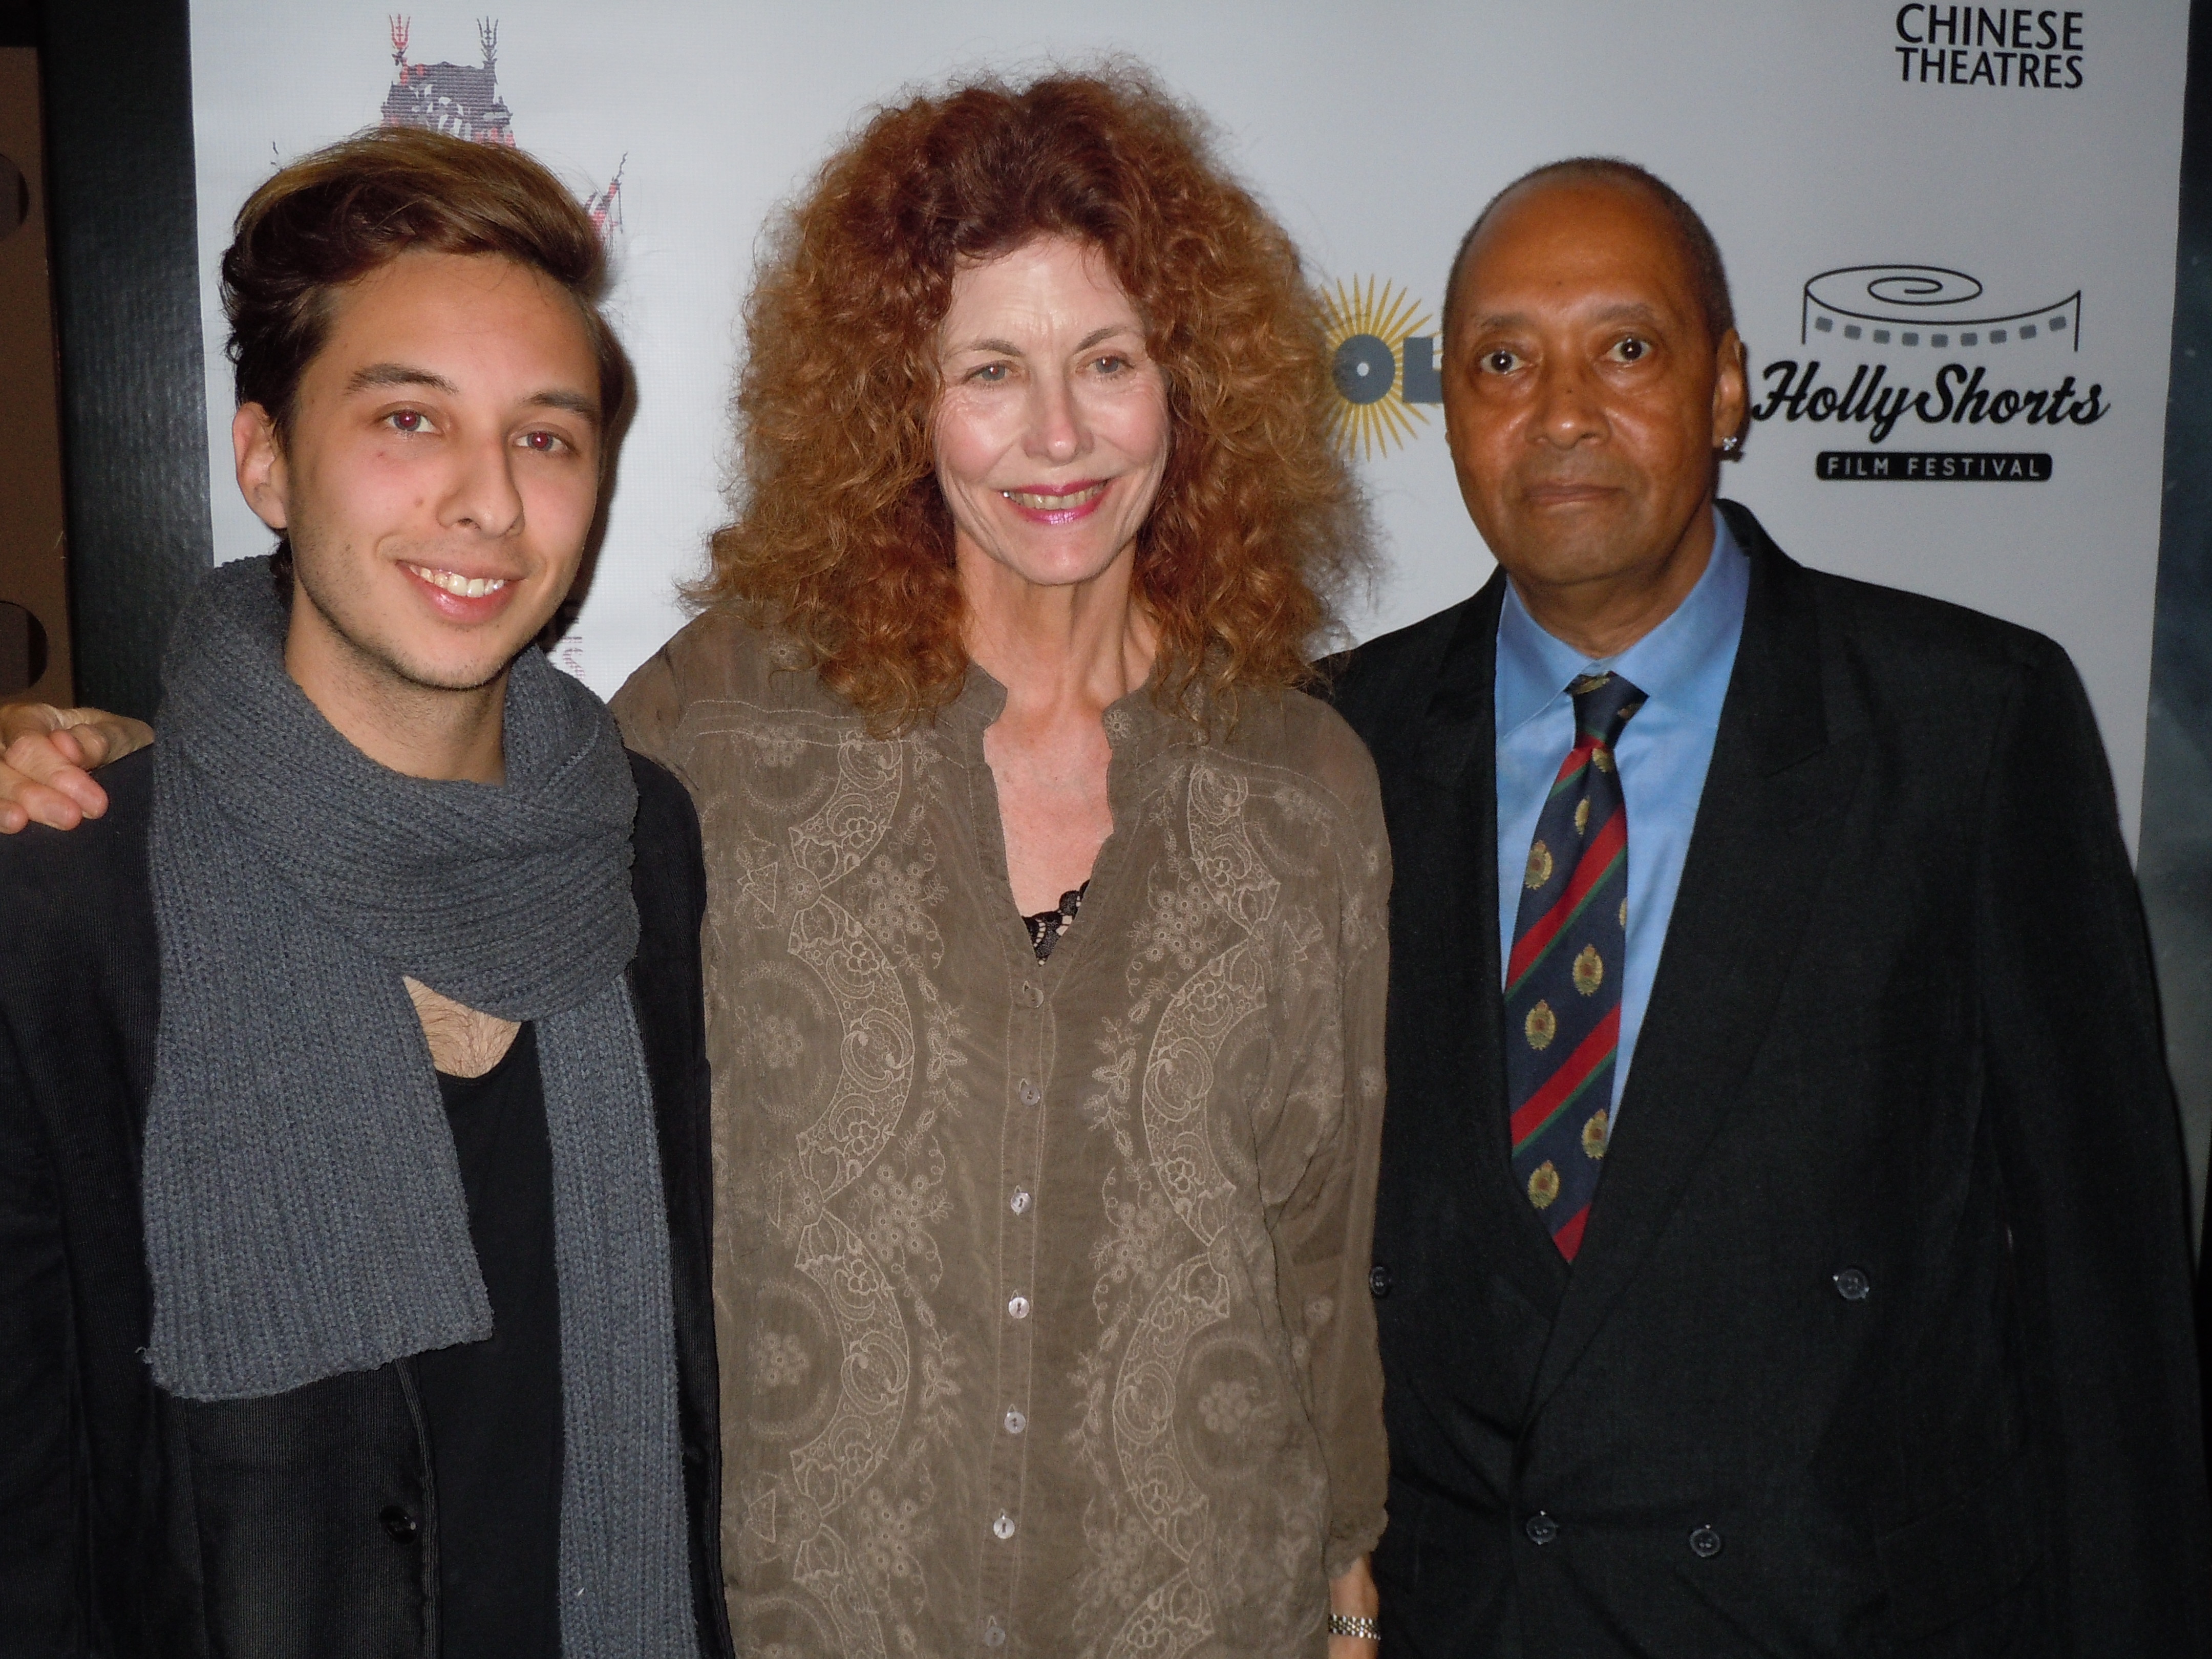 Enrique Pedraza Botero, Vivienne Powell, and Jimmy at event of Song From A Blackbird (2014)